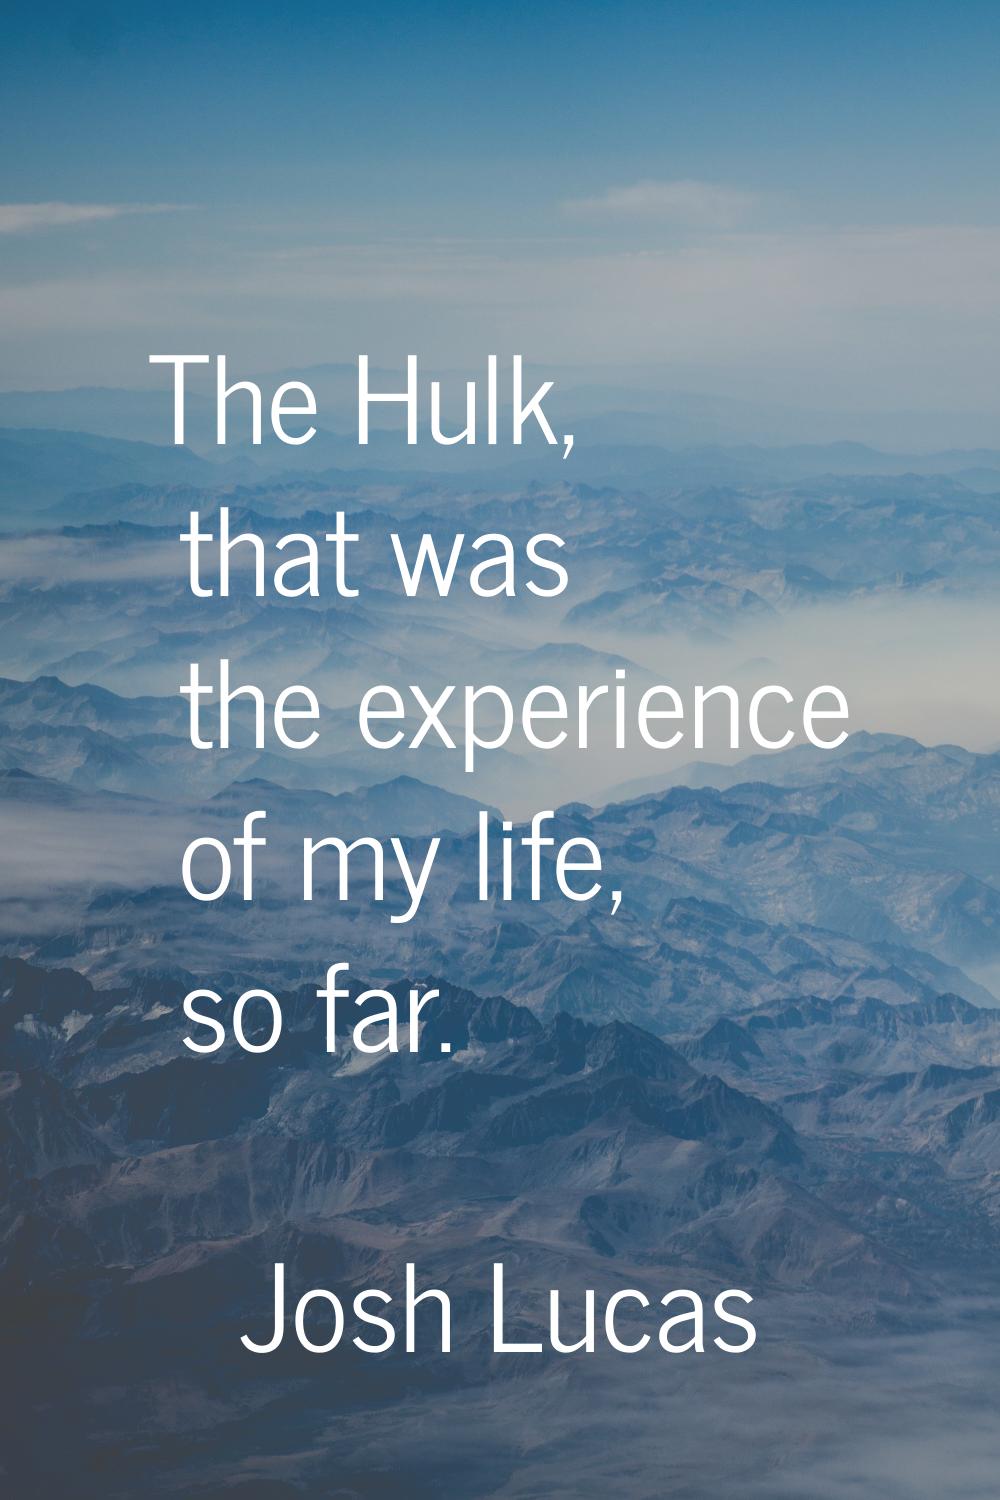 The Hulk, that was the experience of my life, so far.